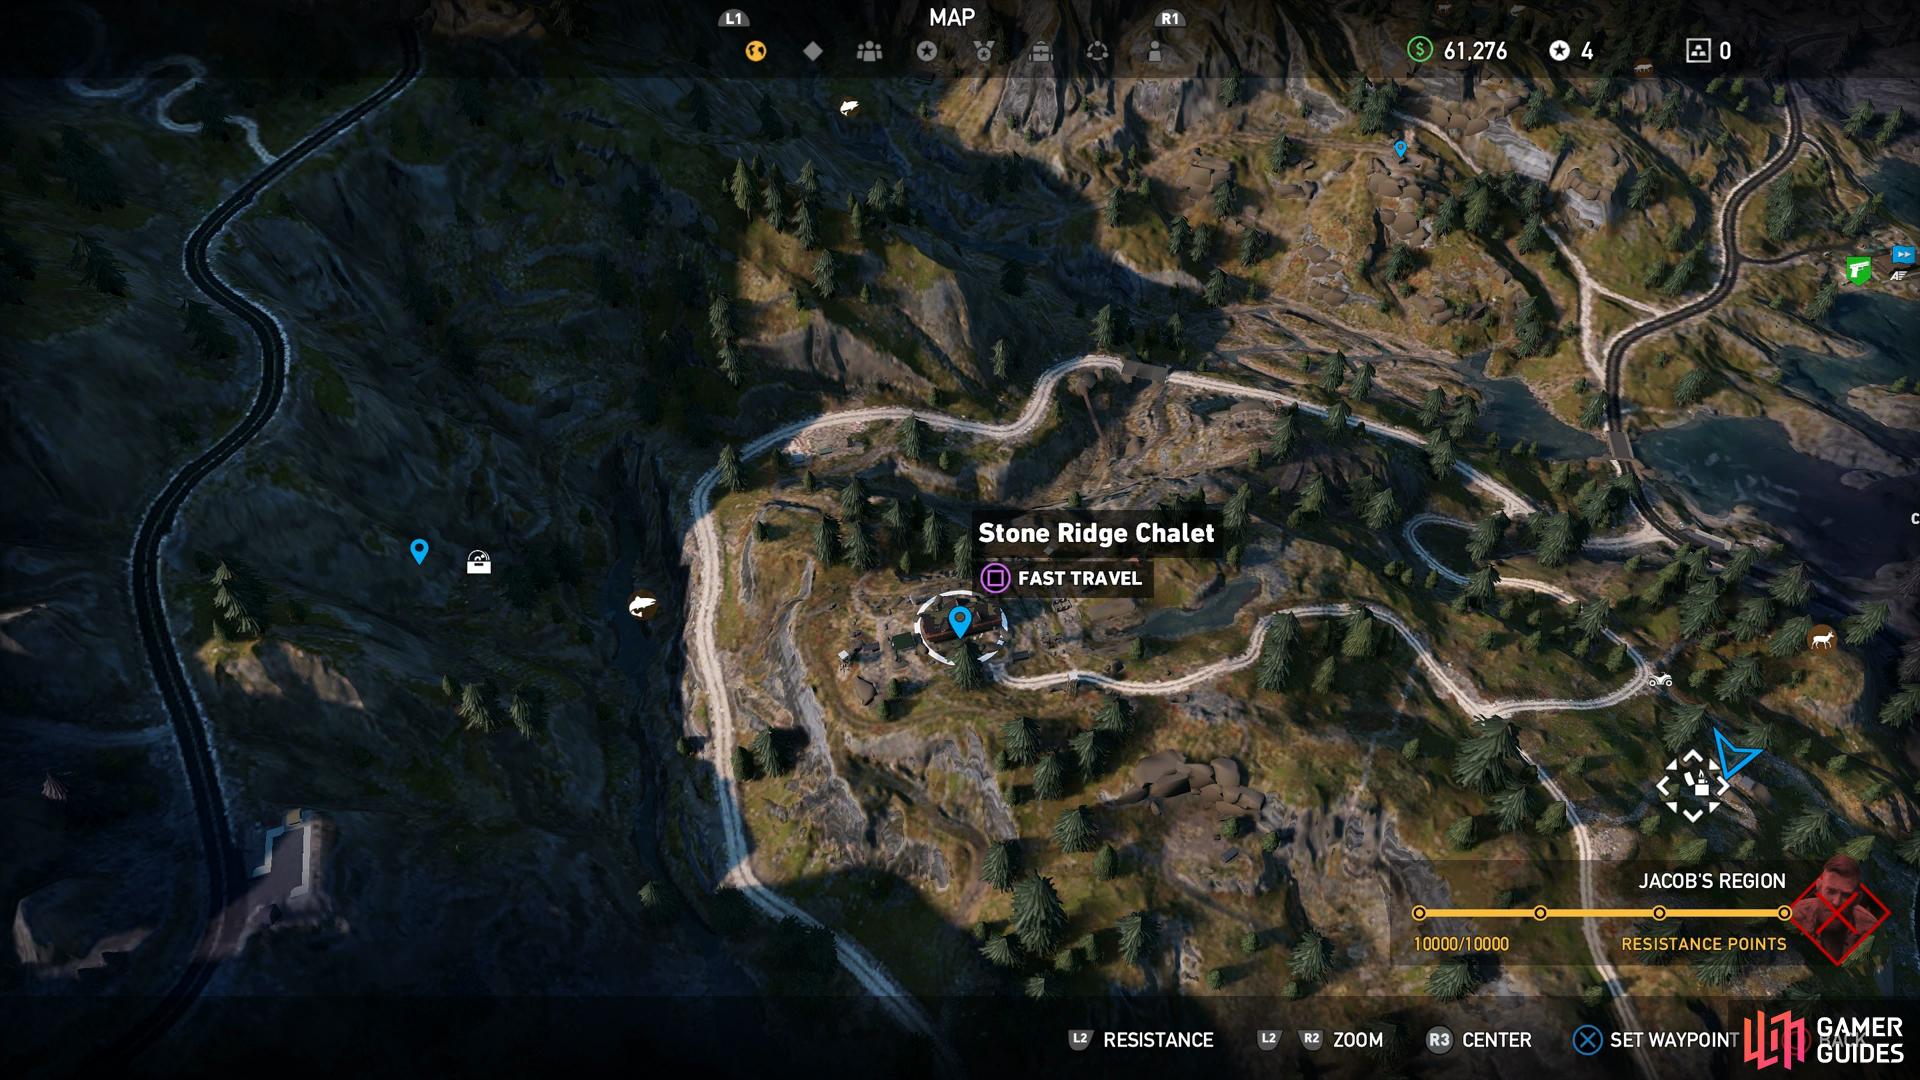 You'll need to travel southeast from Stone Ridge Chalet to reach the bunker